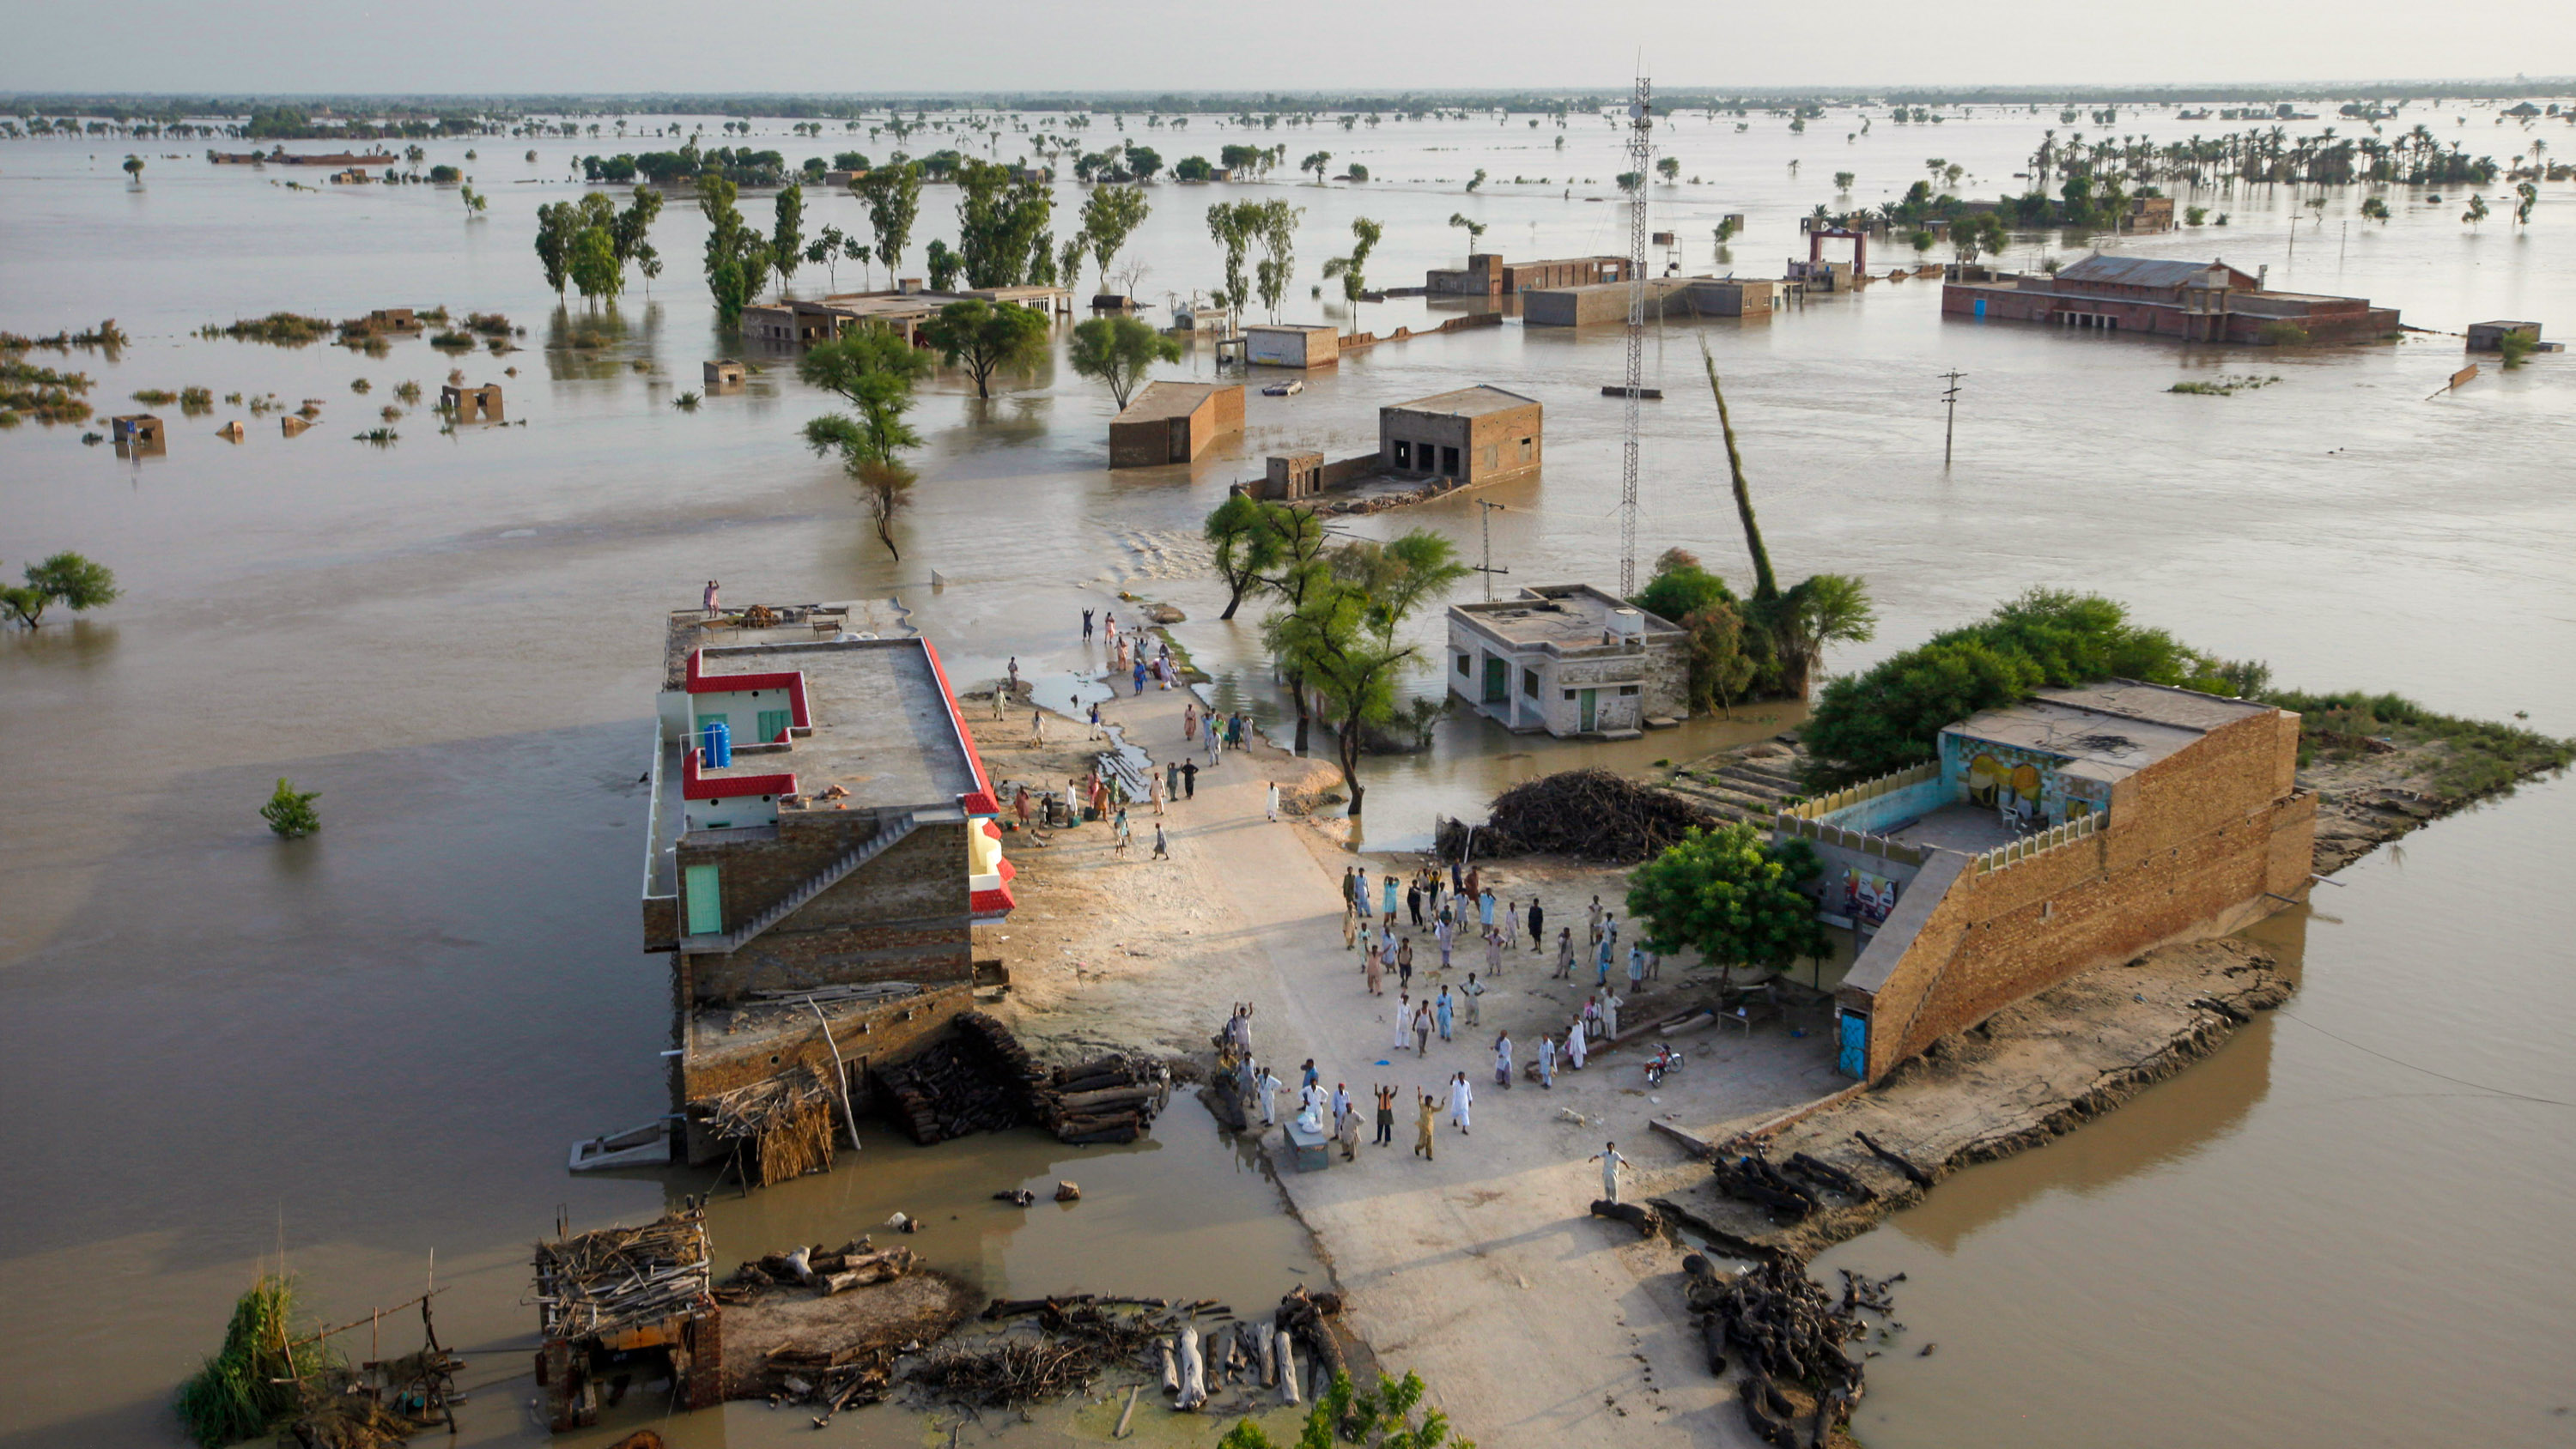 Wide view from a helicopter of a flooded village in Pakistan.  Stranded people wave for help from a dry area.